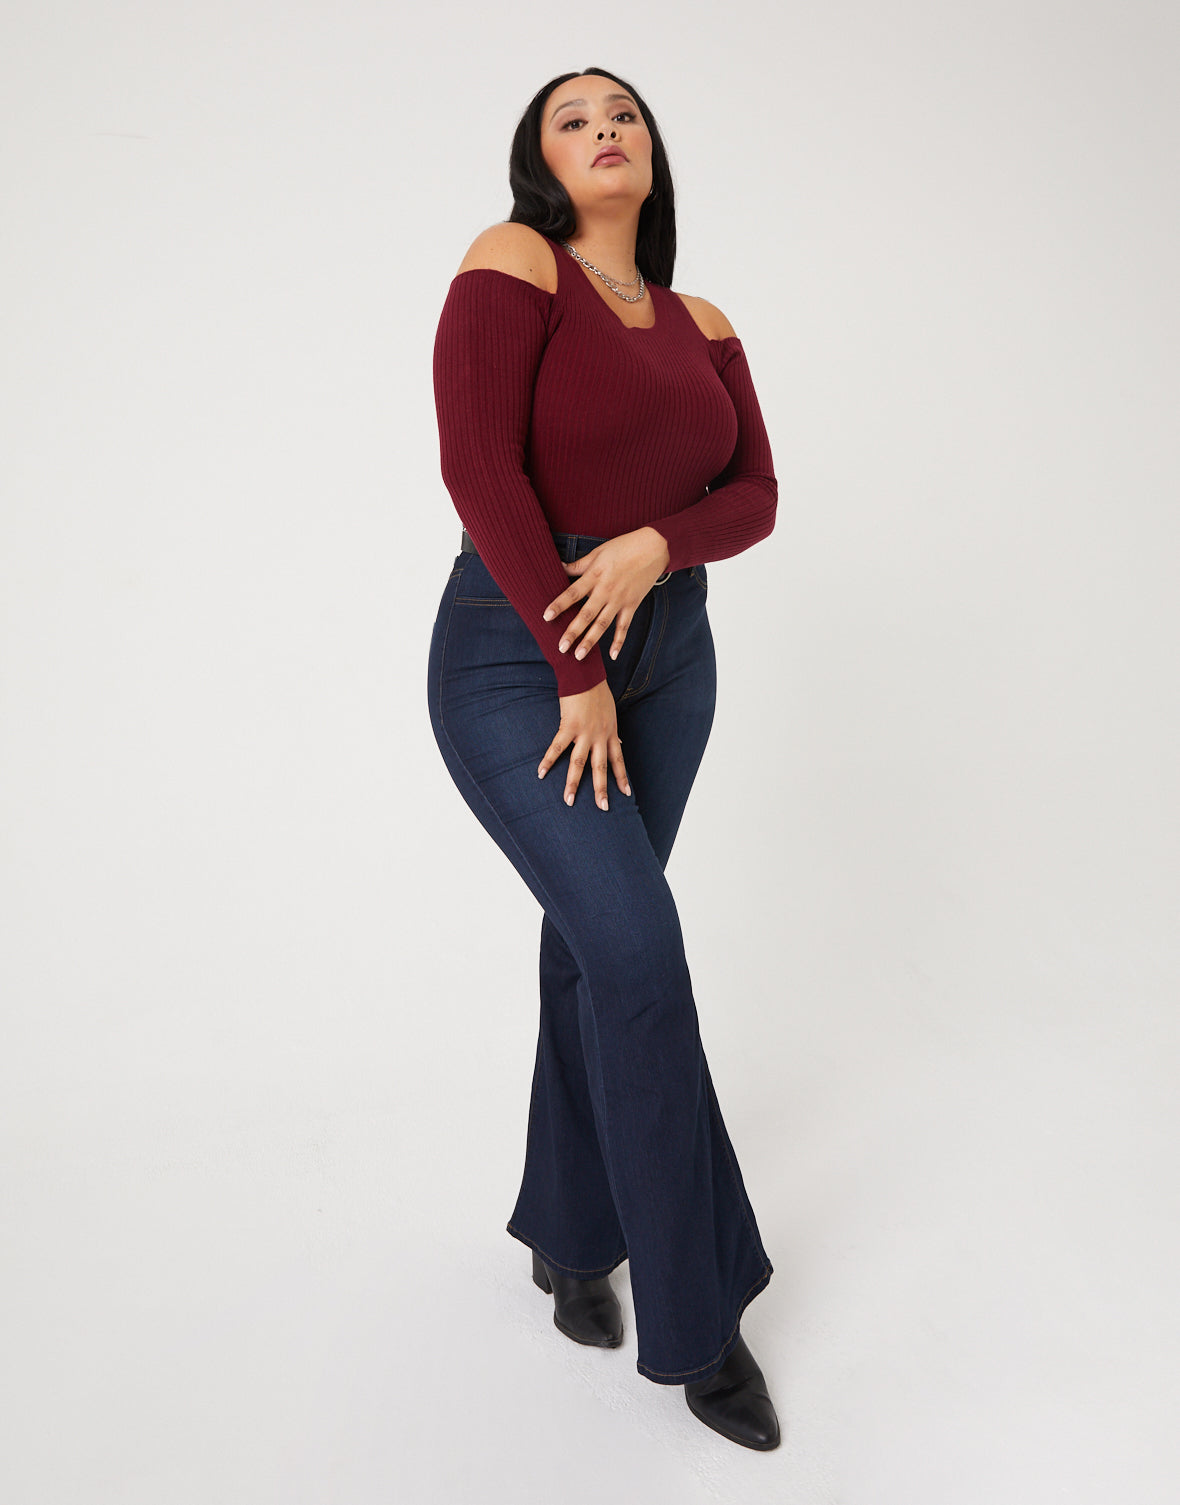 Plus Size 70s Girl Flared Jeans